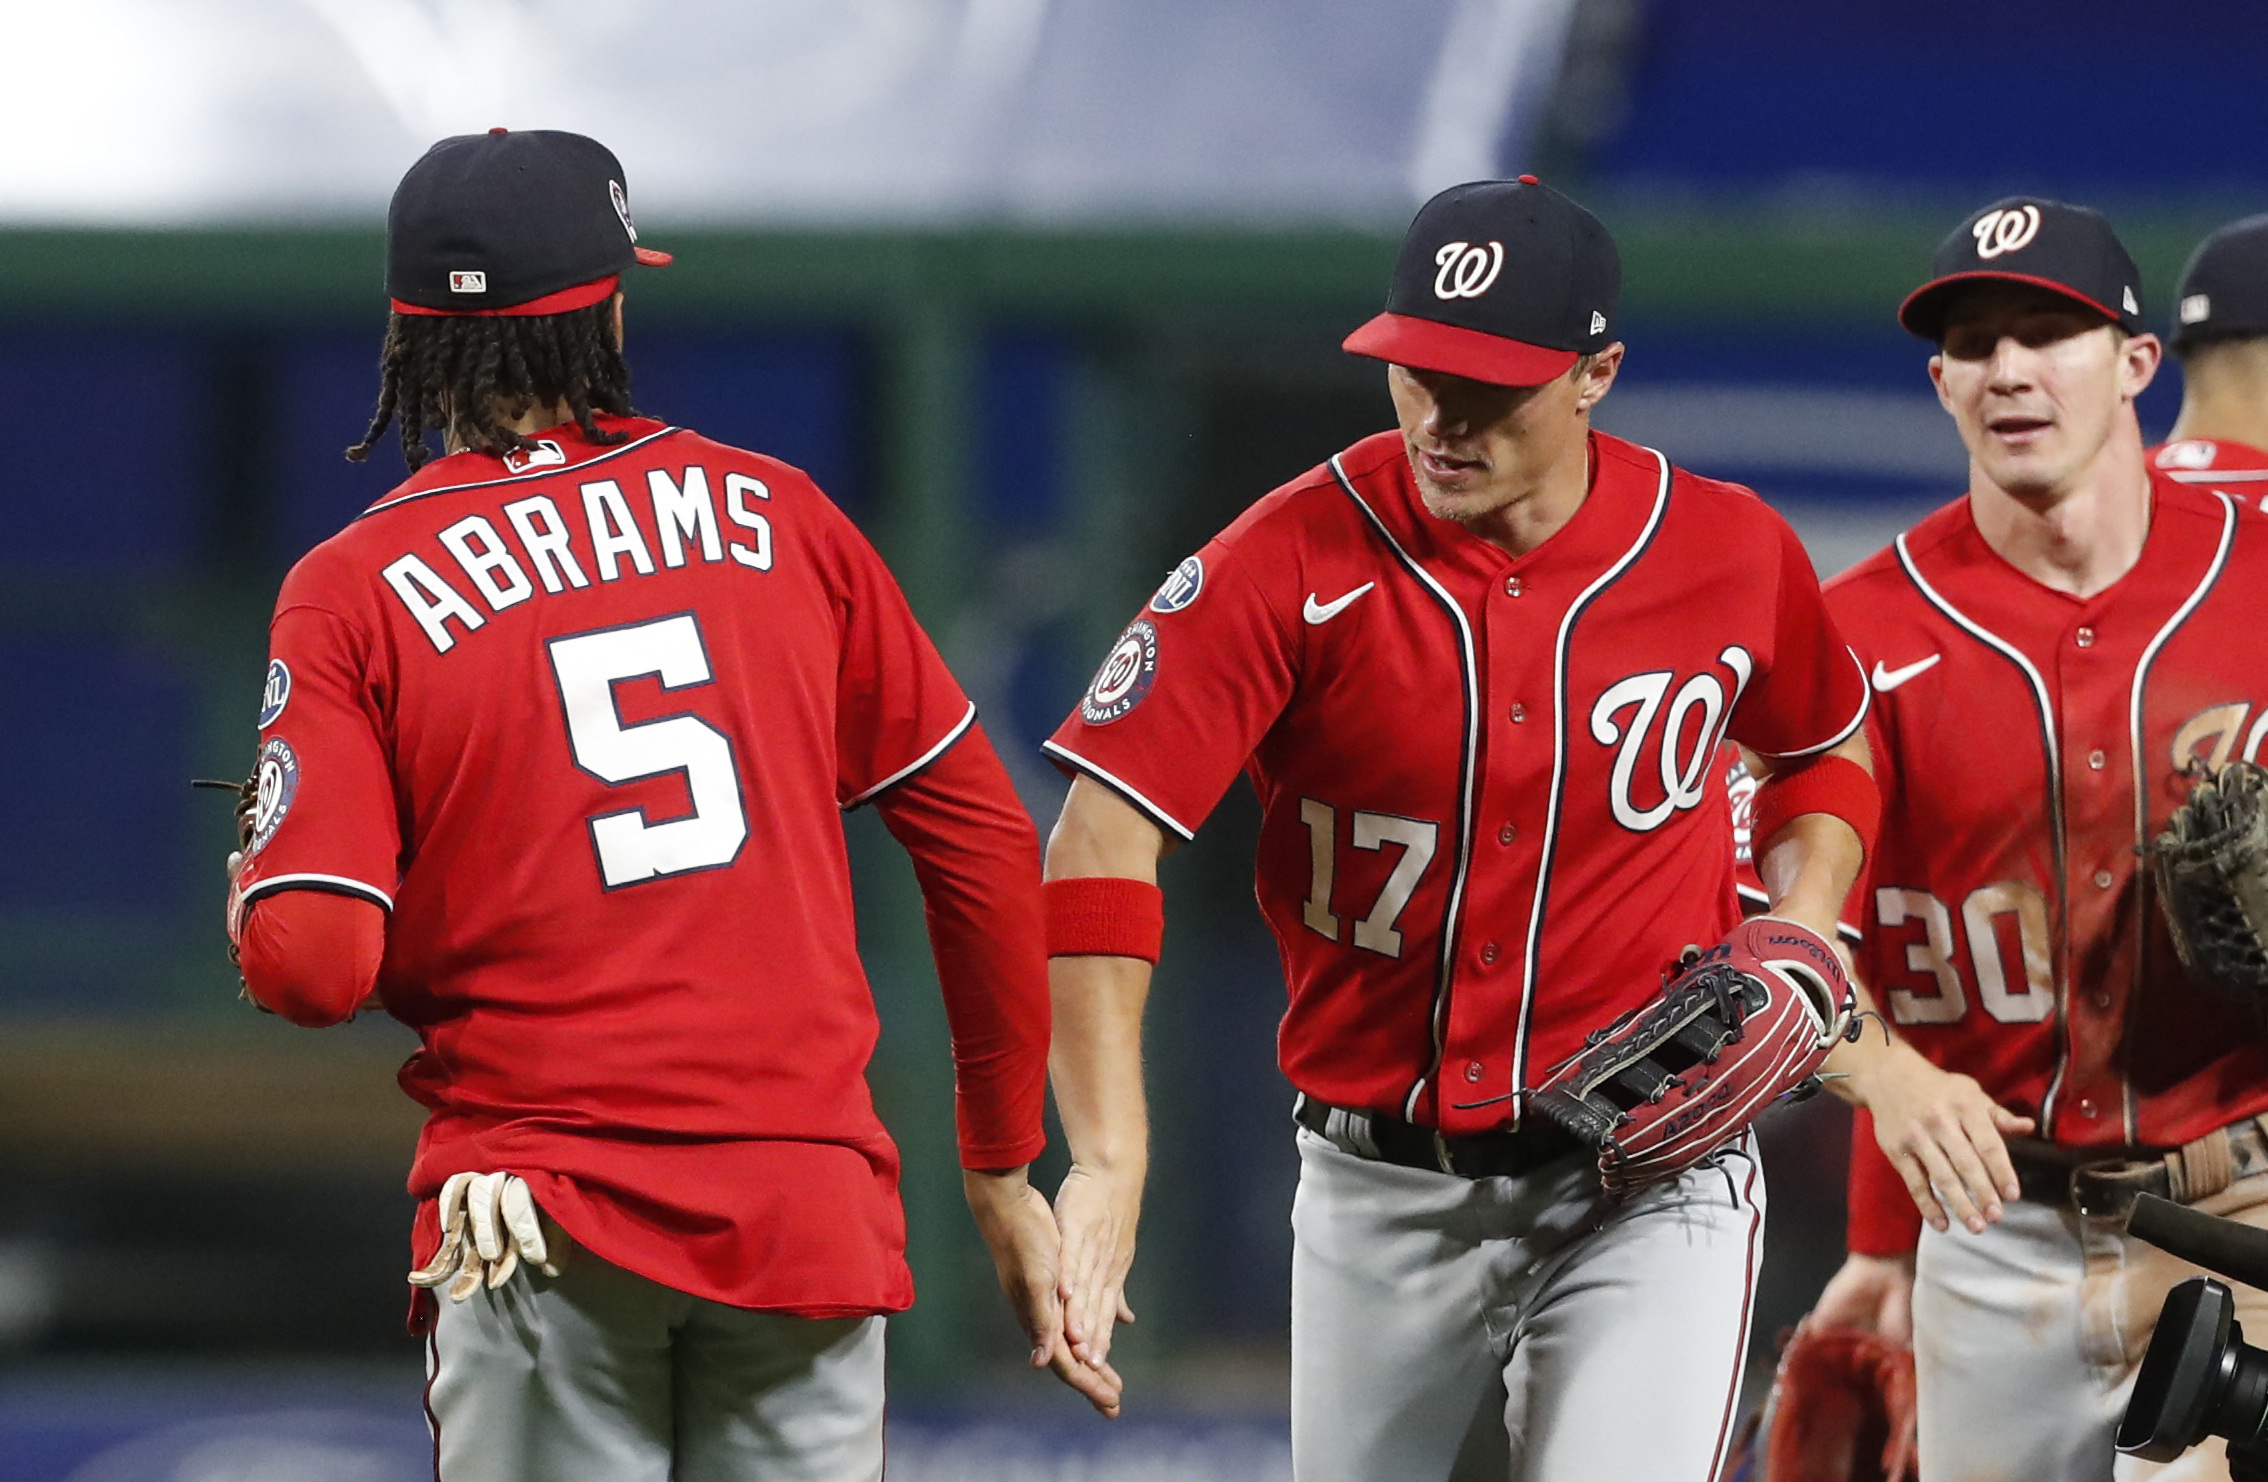 CJ Abrams blasts two homers as Nats handle Pirates